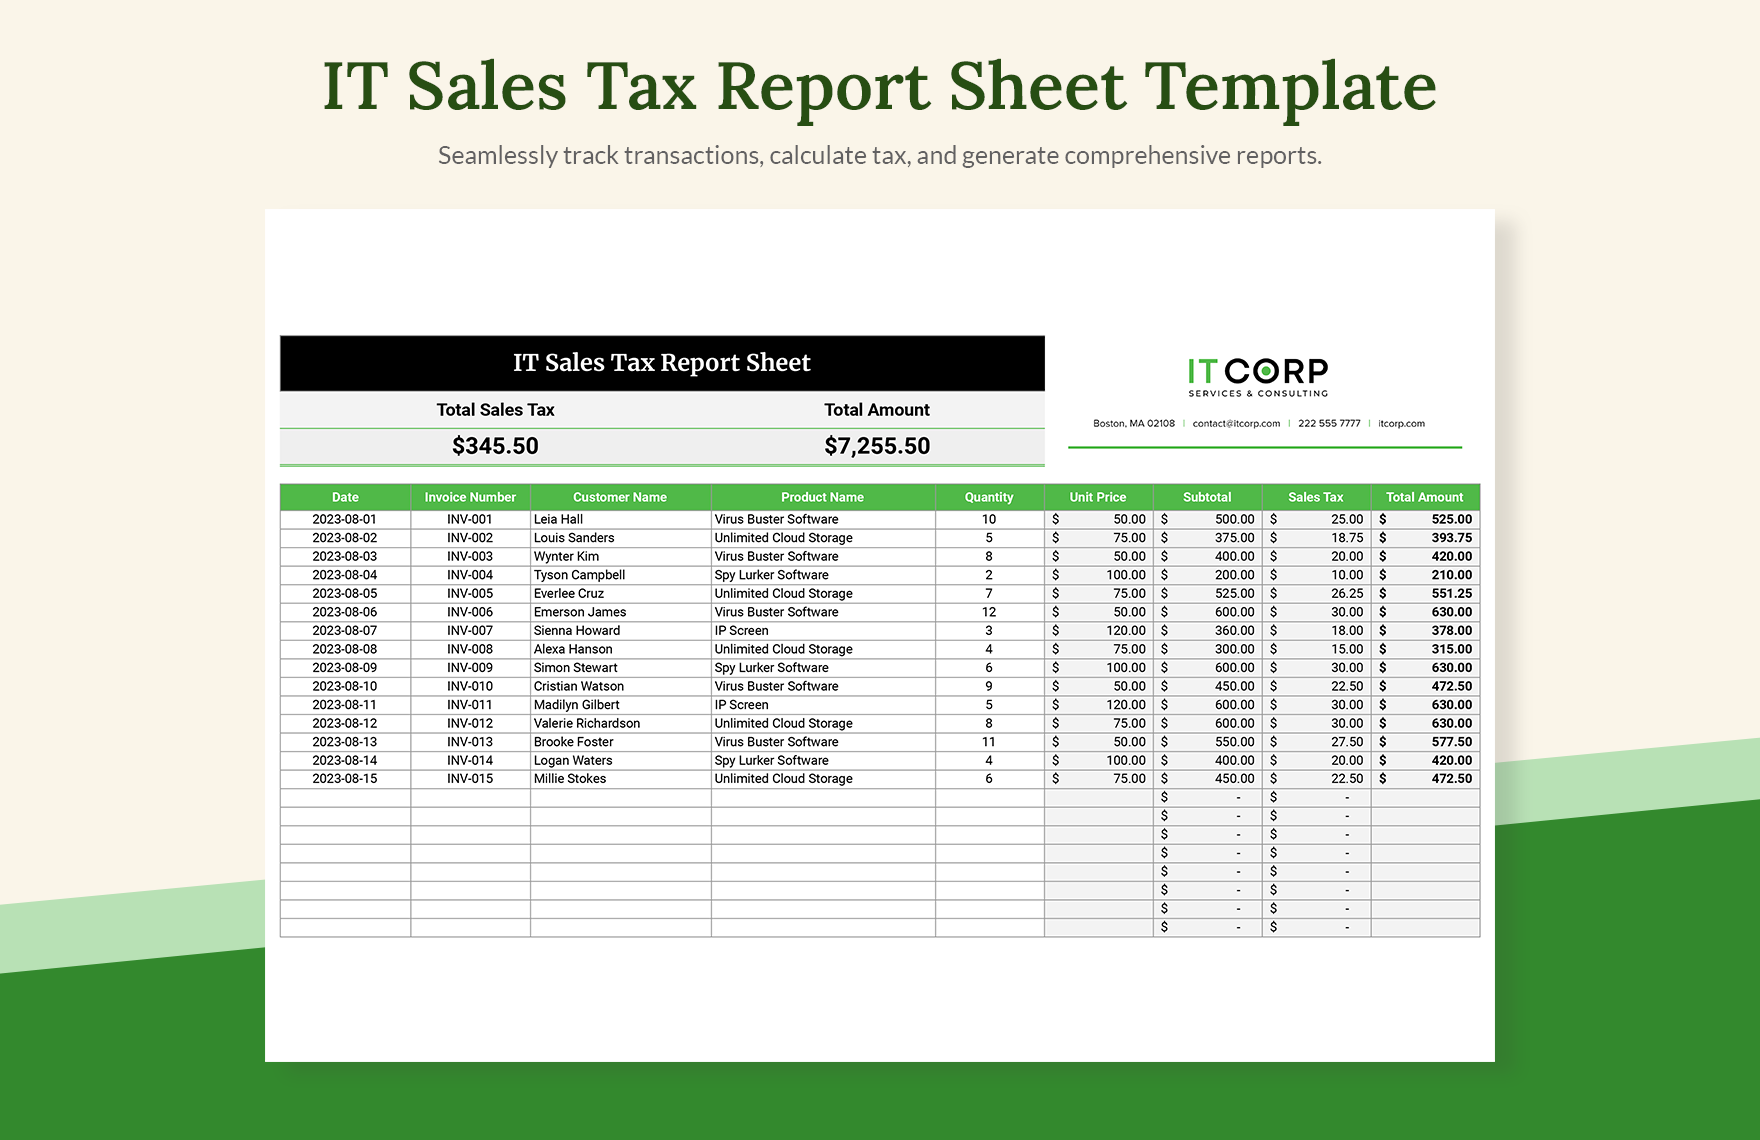 Tax Client Information Sheet Template in Google Docs Word Pages PDF